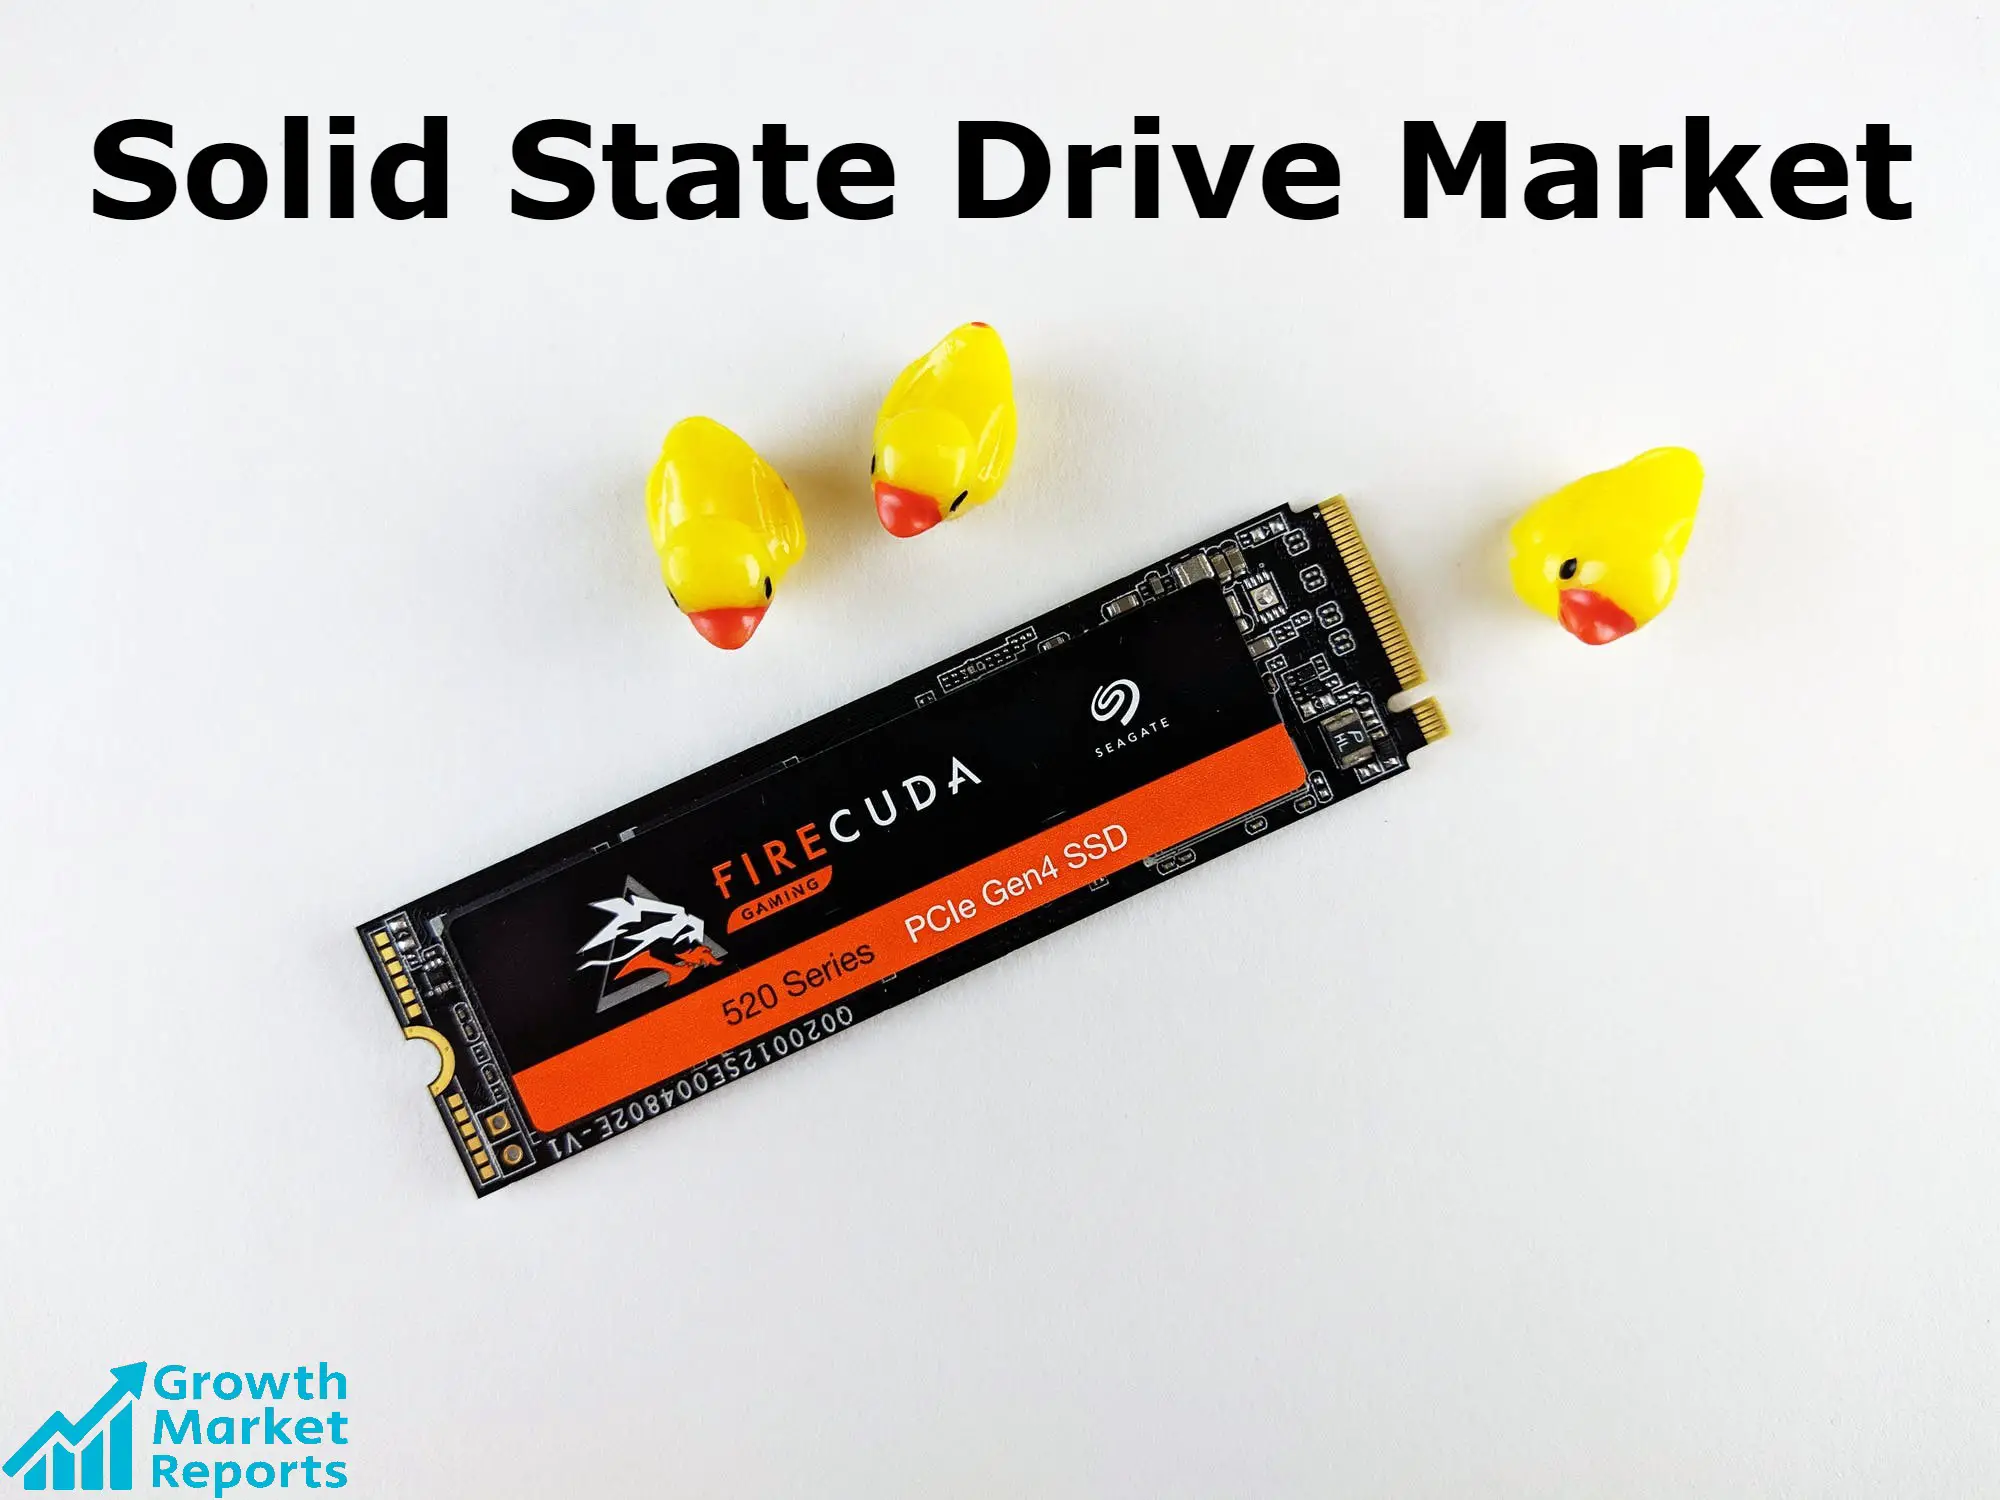 Solid State Drive Market-Growth Market Reports-0f2826b8